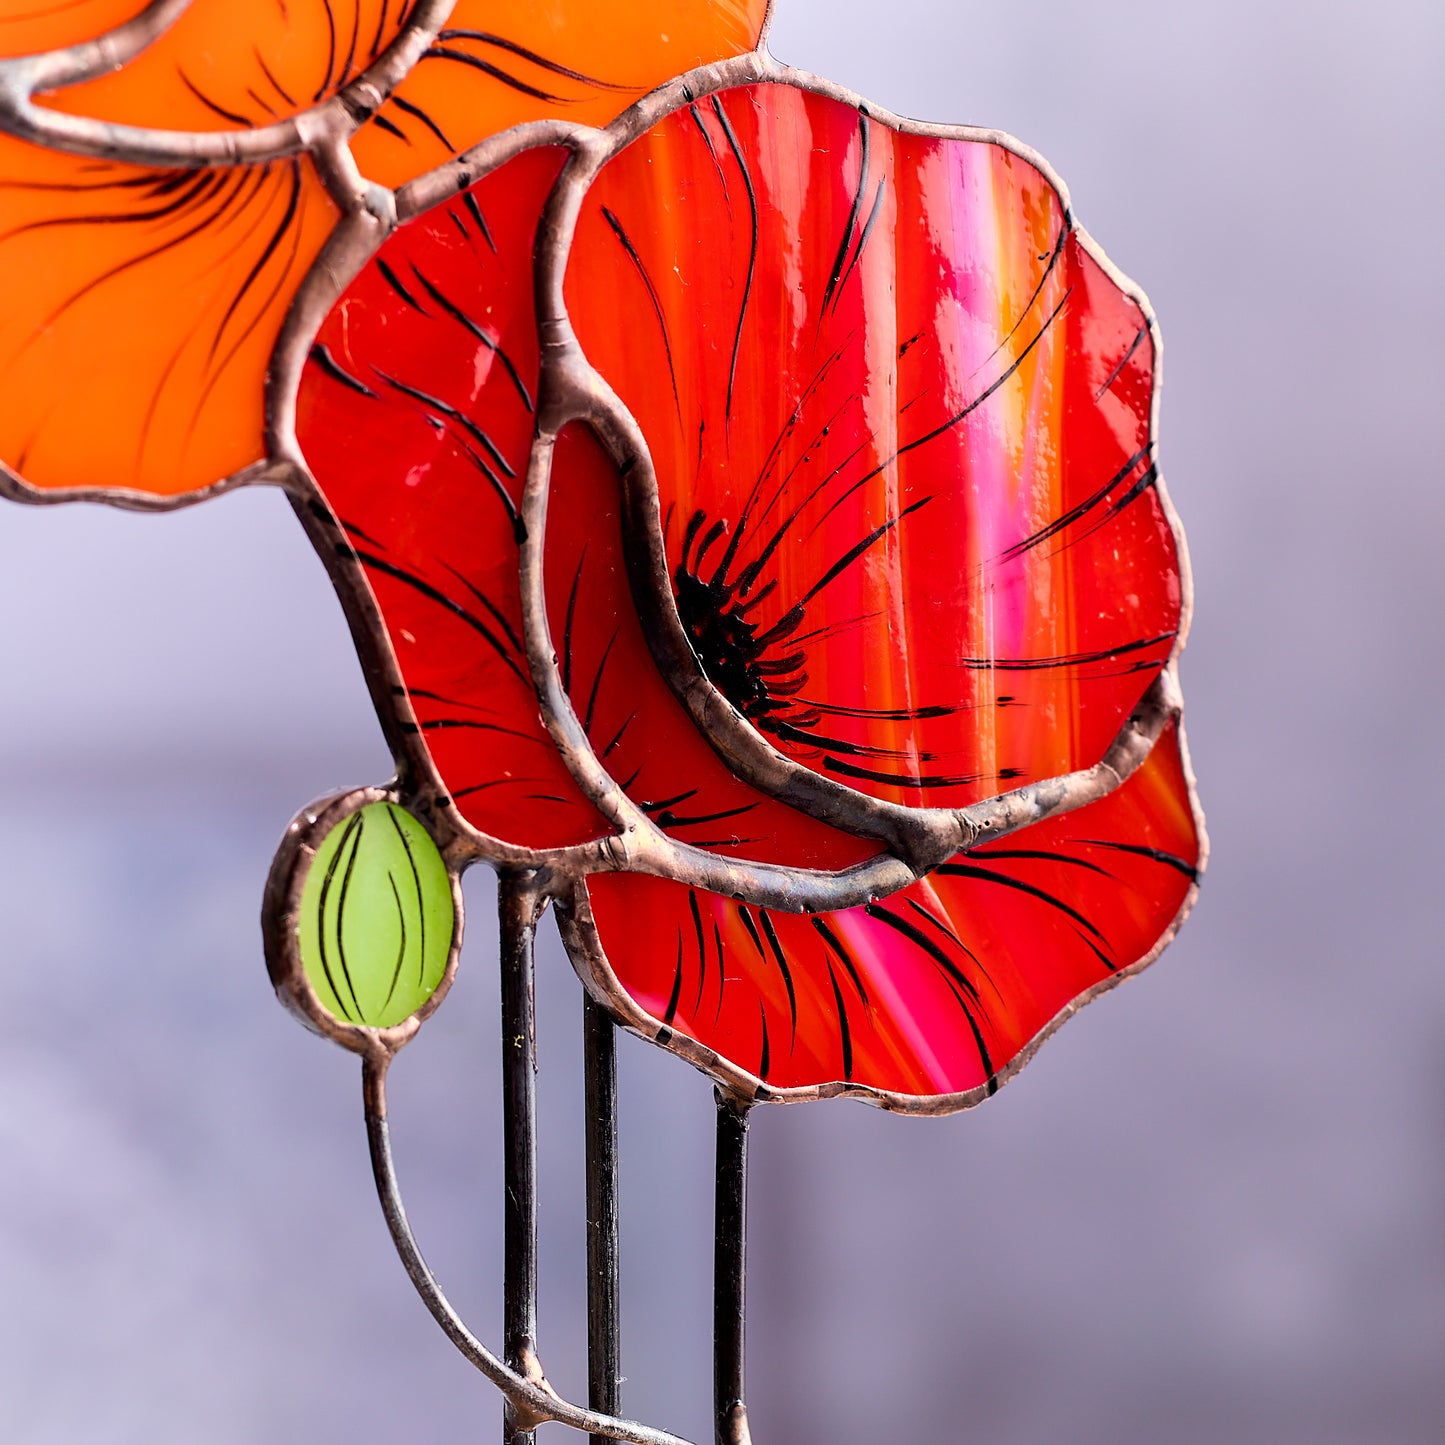 Red Poppy flower Stained Glass Tabletop Decor